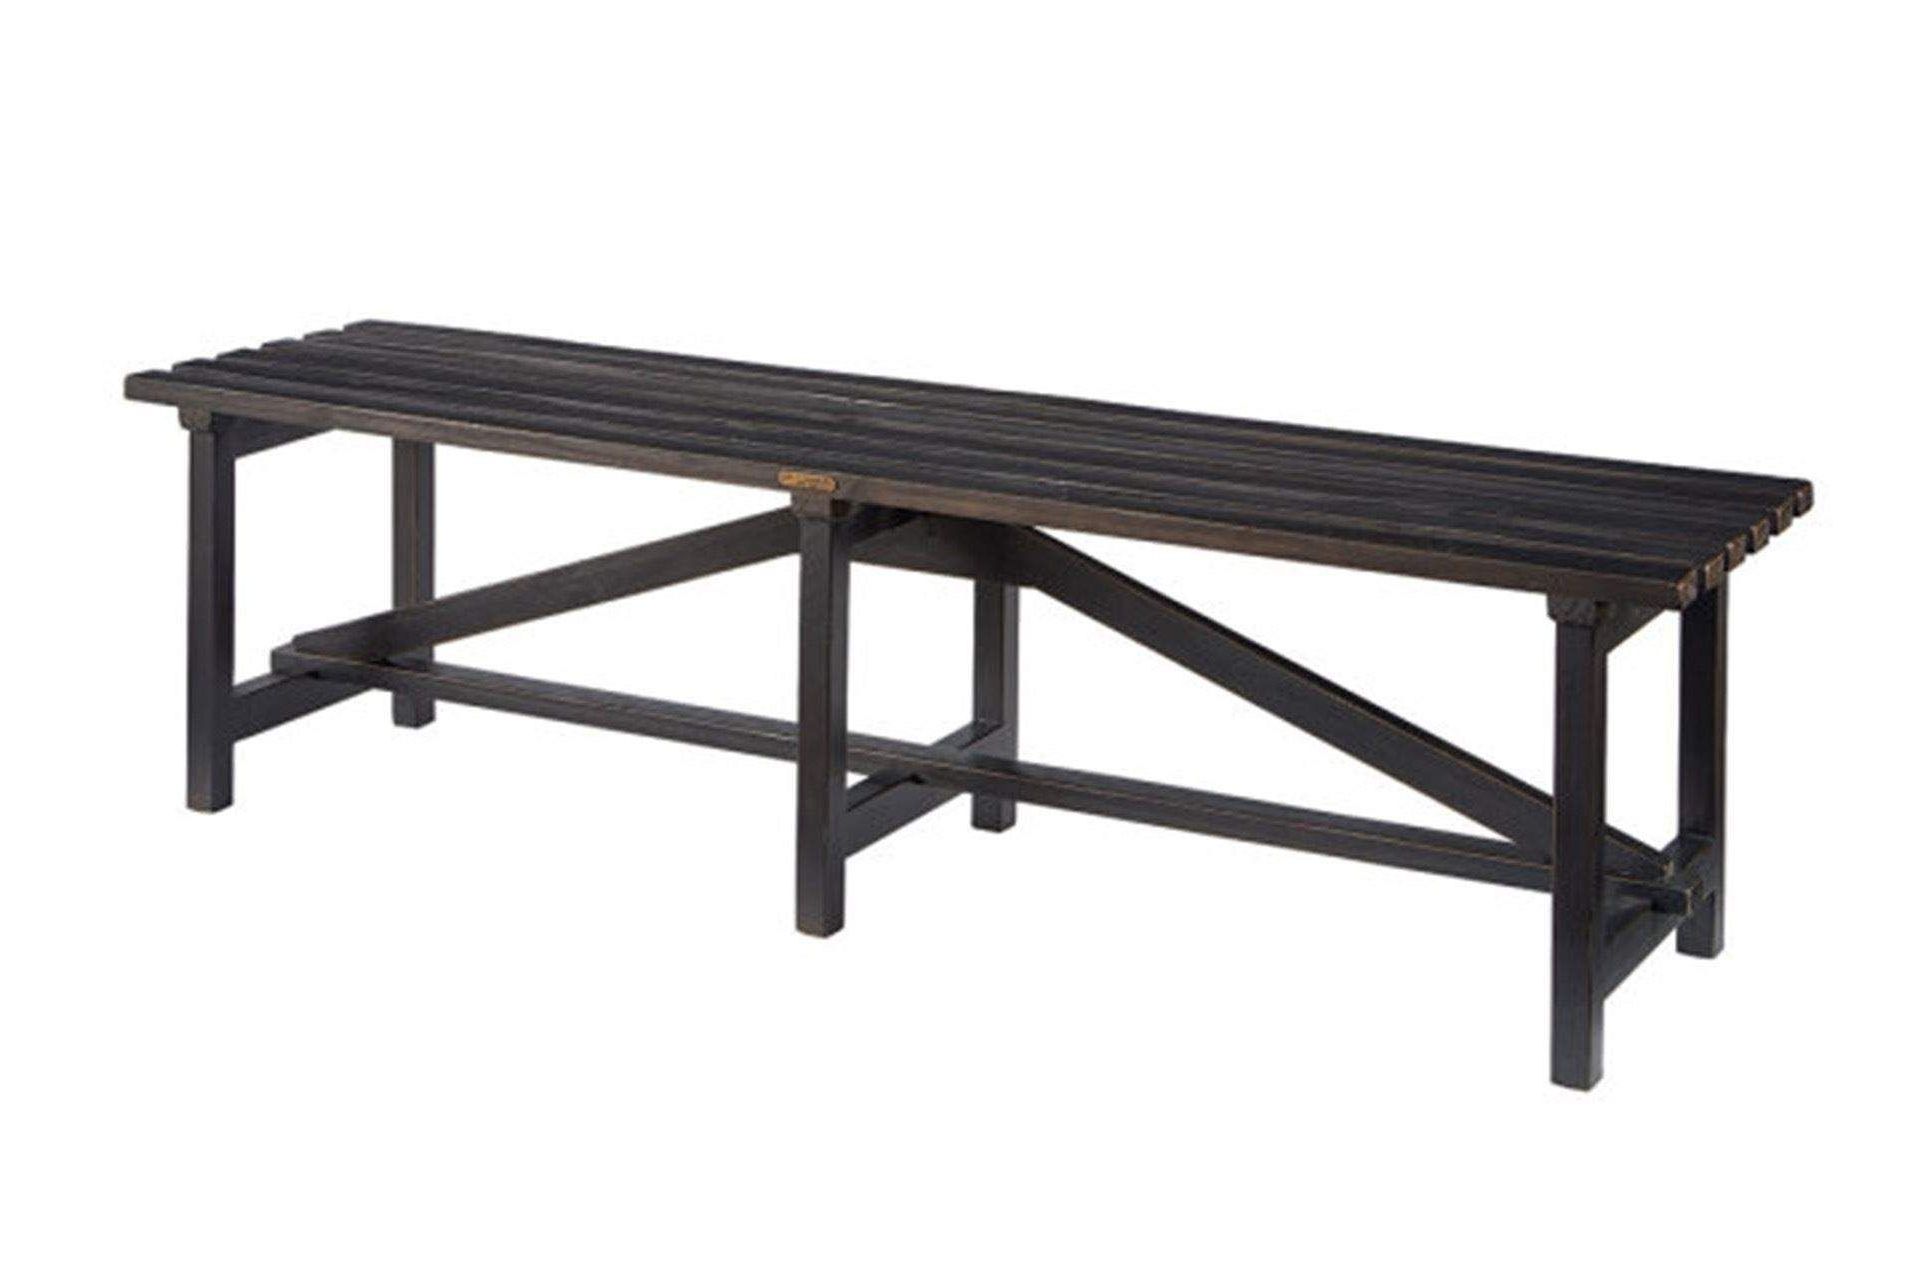 This Handsome Versatile Open Slat Bench From Magnolia Homejoanna In Latest Magnolia Home Taper Turned Bench Gathering Tables With Zinc Top (View 12 of 25)